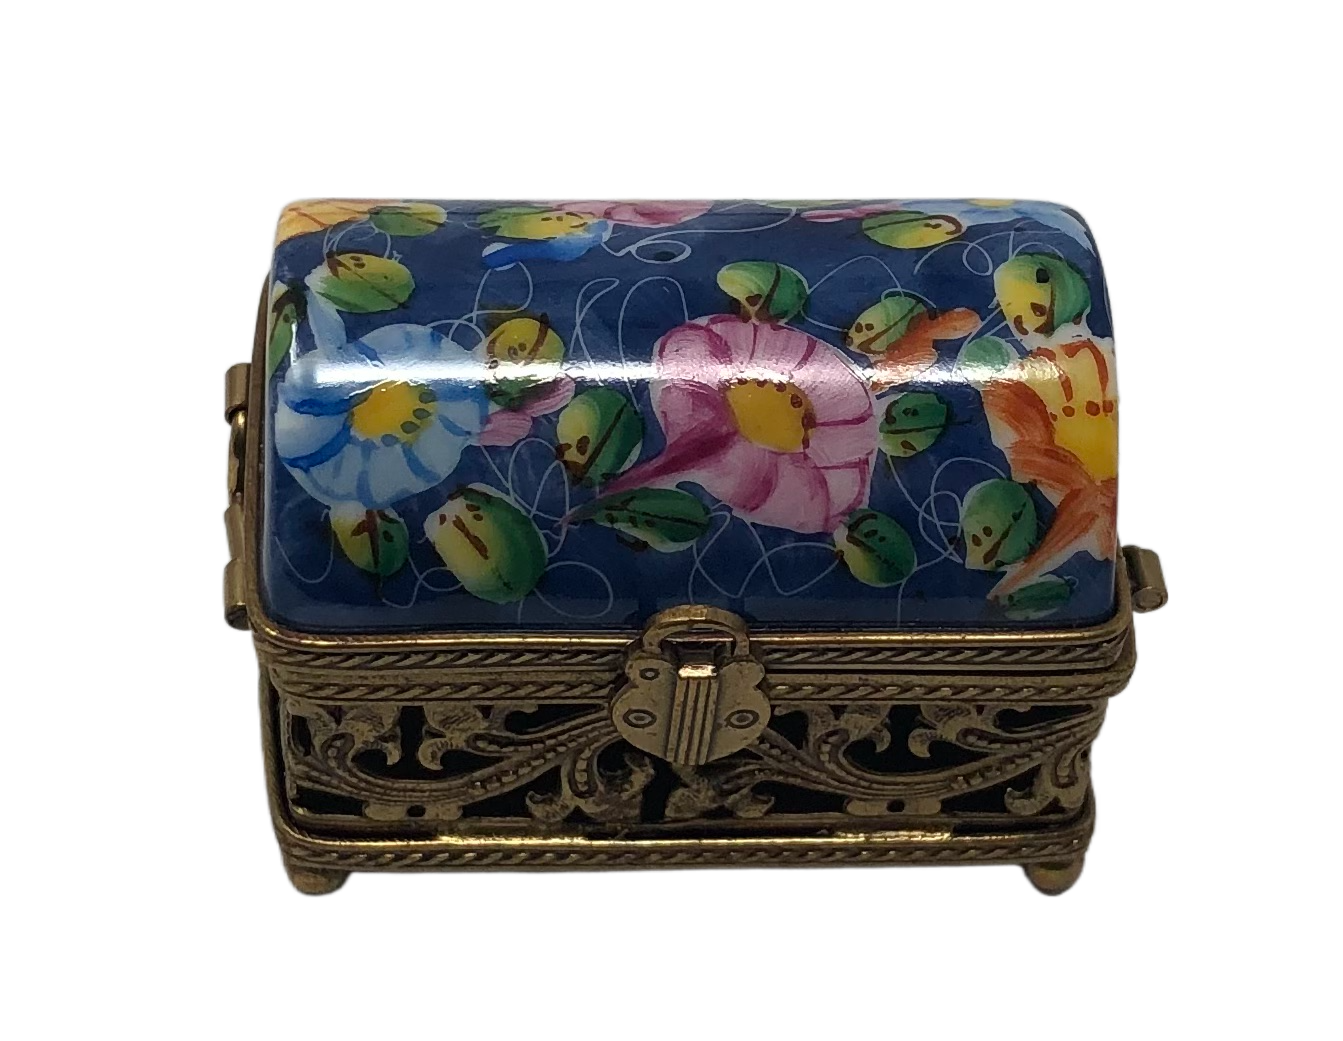 Enchanted Treasures: Intricately Detailed Treasure Chest Limoges Box